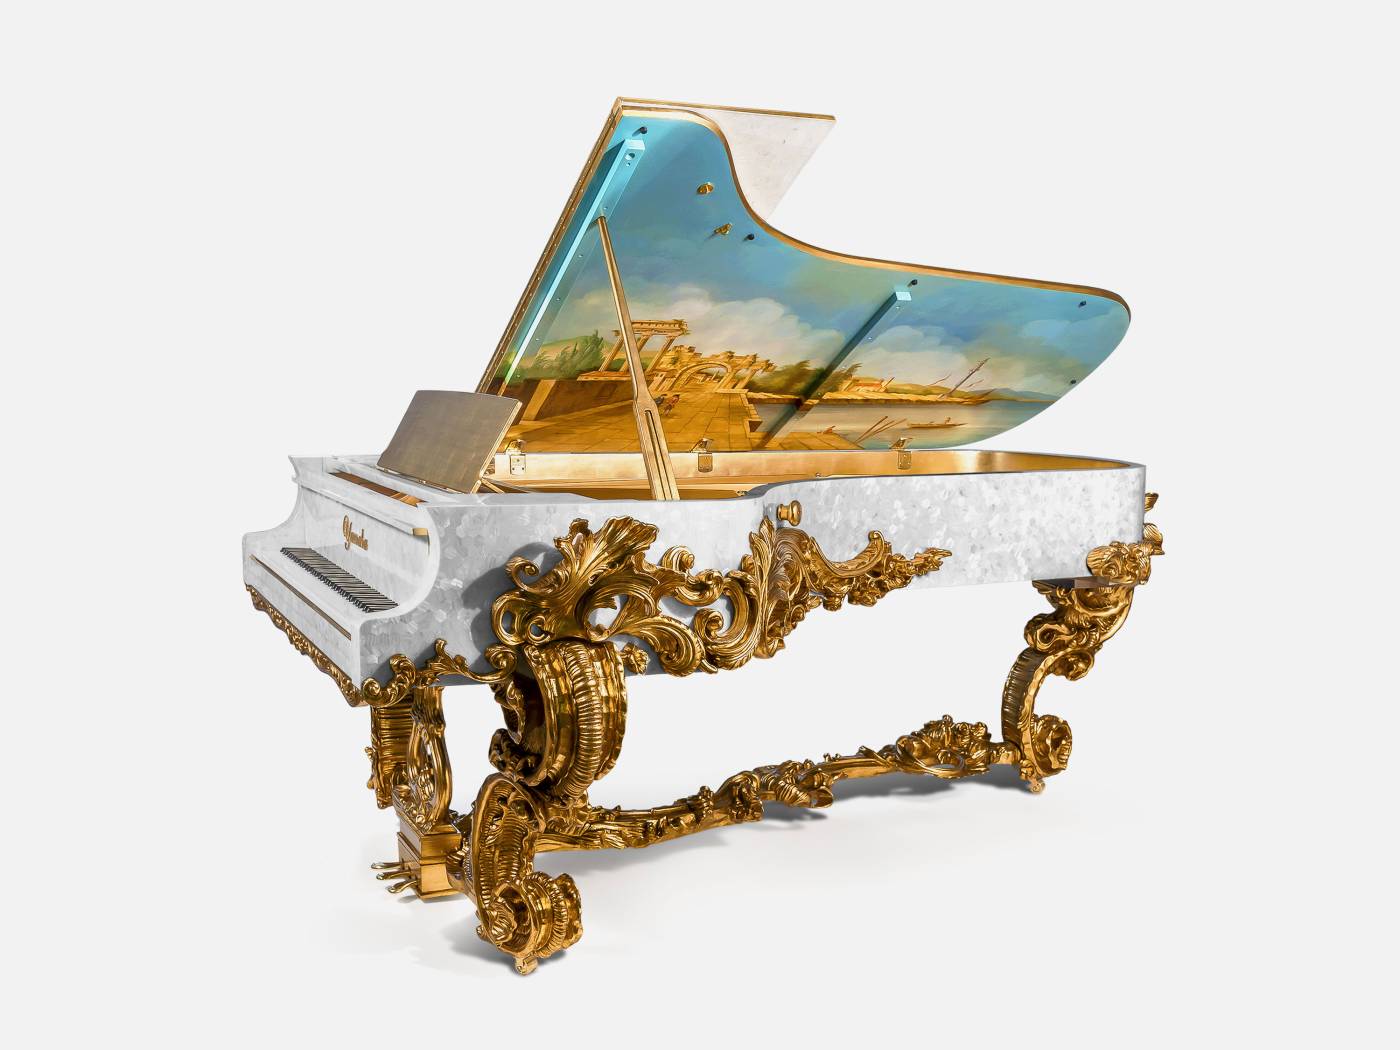 ART. 2711 - C.G. Capelletti quality furniture with made in Italy contemporary Pianos